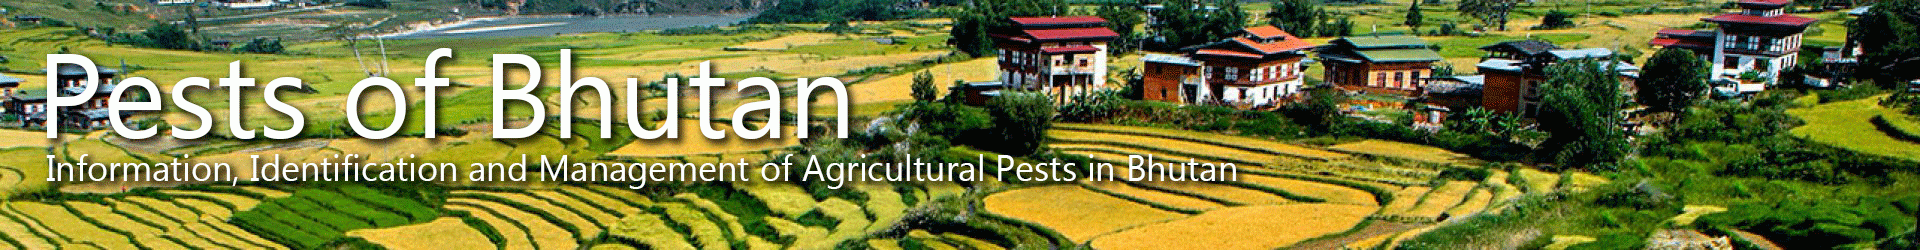 New maize storage Insect pest record for Bhutan